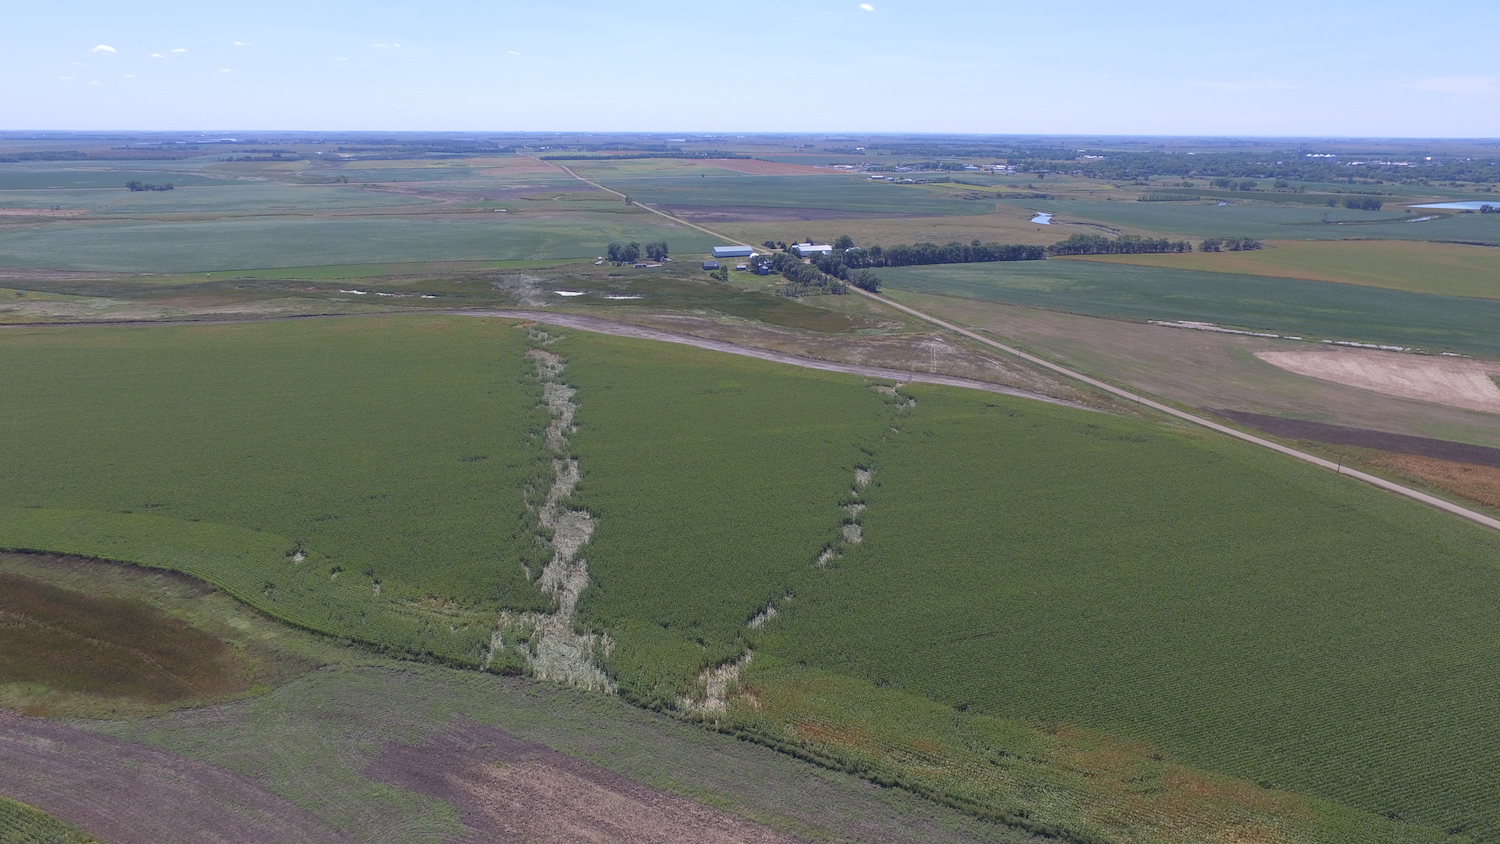 Tornado tracks in corn field on northeast side of Redfield and looking southwest. Tornado #1 is on the right and tornado #2 is on the left. (Photo by Steve Fleegel)